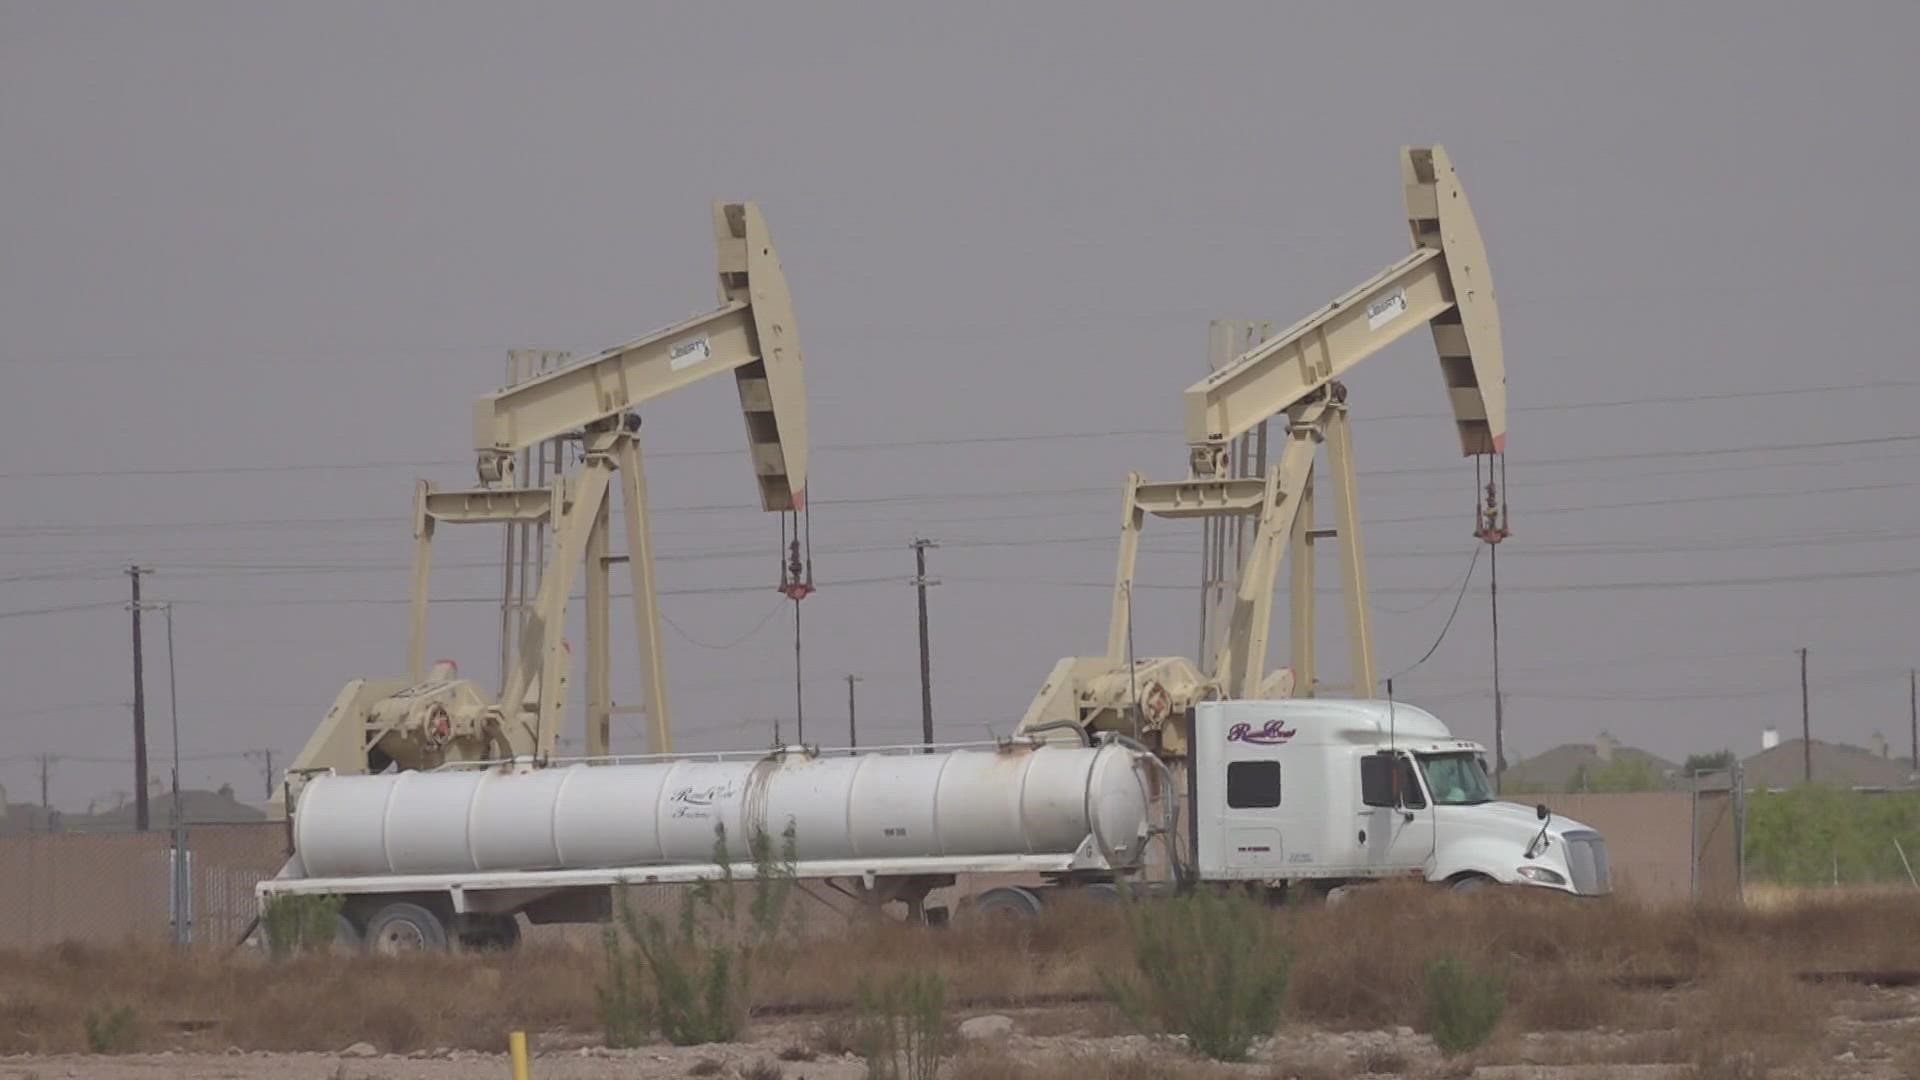 James Beauchamp, president of MOTRAN, said the purpose is to keep people in the Permian Basin informed about what's going on with the EPA's notice to the area.